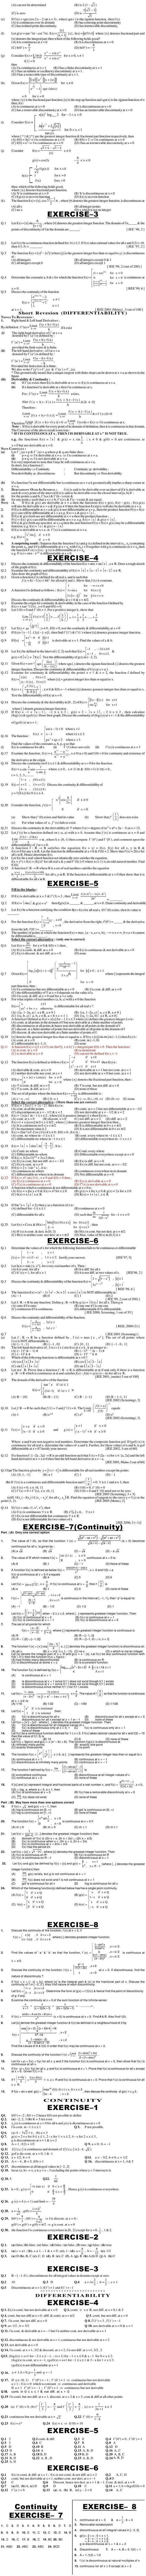 Maths Study Material - Chapter 10